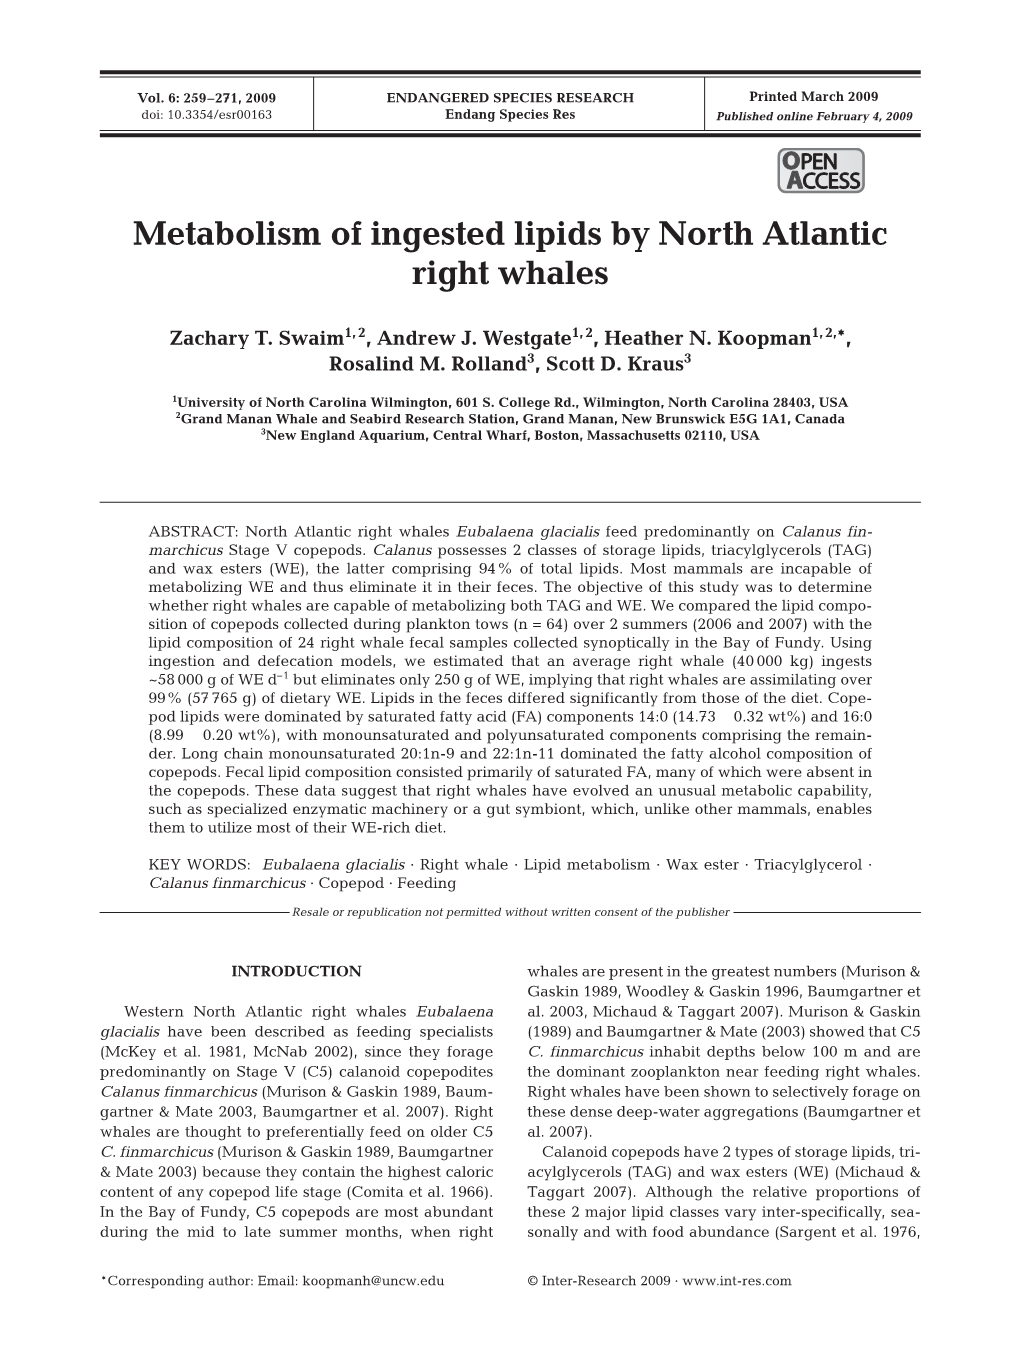 Metabolism of Ingested Lipids by North Atlantic Right Whales